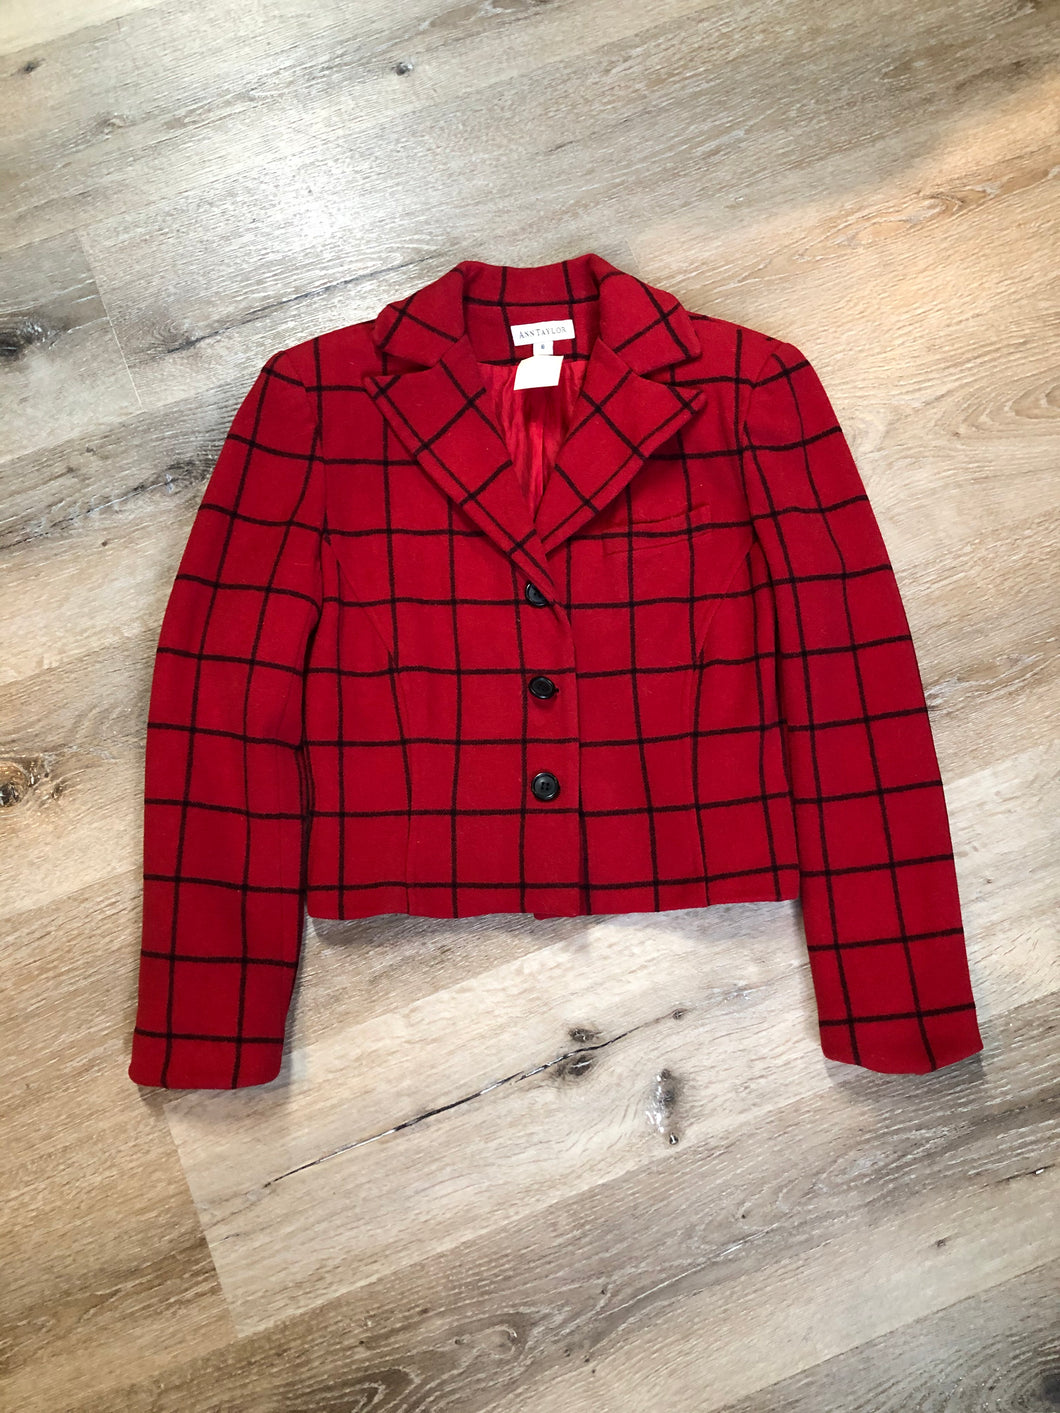 Kingspier Vintage - Vintage Ann Taylor red and black plaid wool jacket with button closures and one chest pocket. Size small. 

Shoulder to shoulder - 17.5”
Shoulder to wrist - 22.5”
Under sleeve - 16.5”
Armpit to armpit - 19”
Armpit to hem - 10.5”
Bottom hem - 16”

*All items have been laid flat to measure.

This Jacket is in excellent condition.